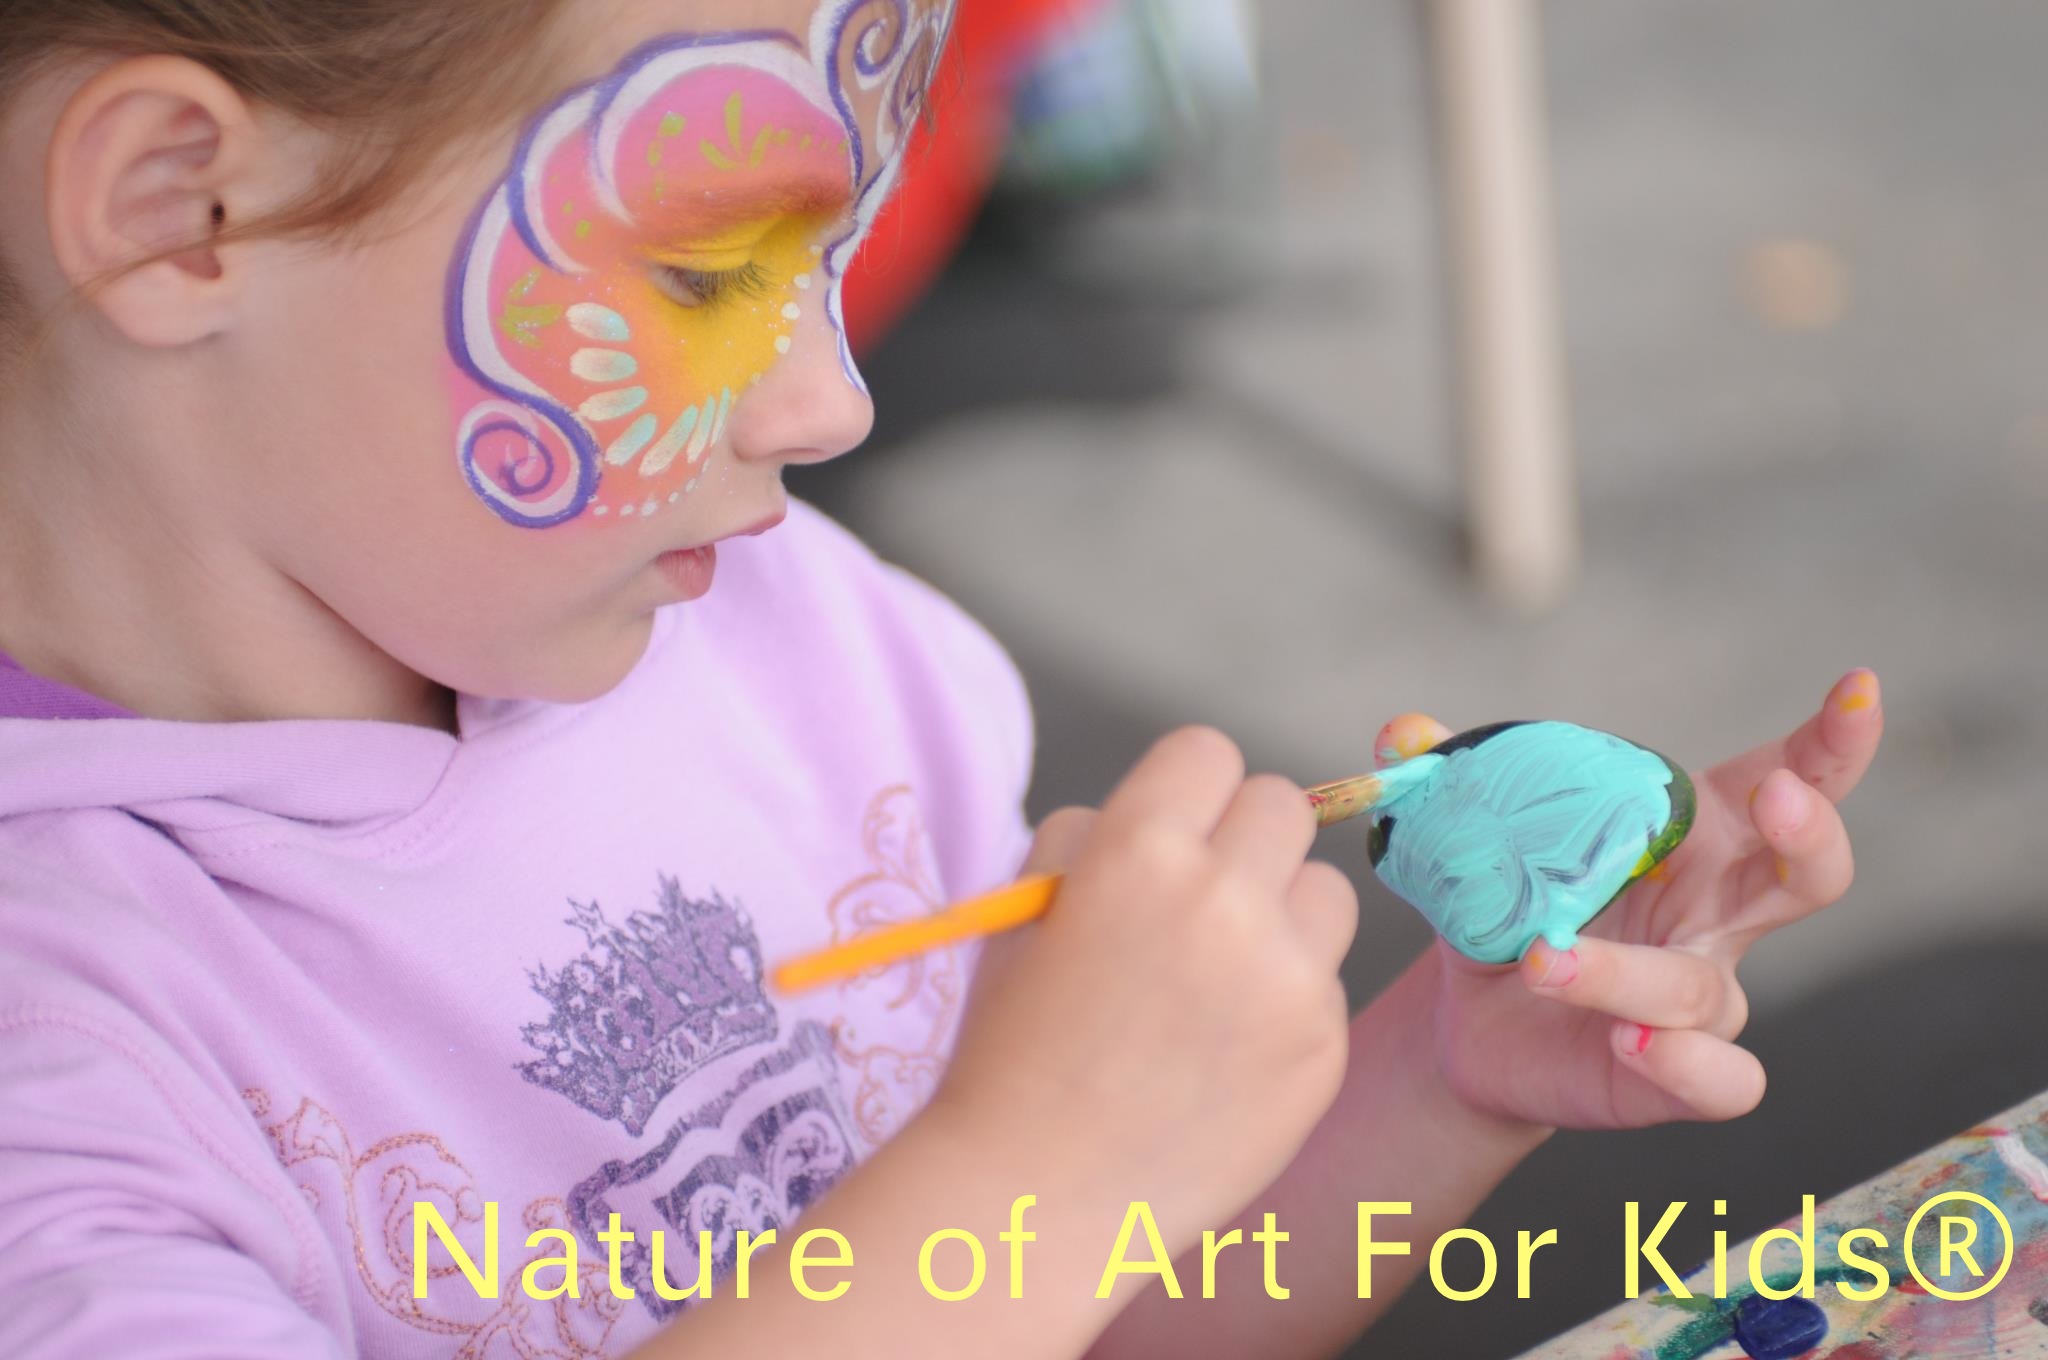 How To Pick Paints For Kids Art Projects, safe non-toxic